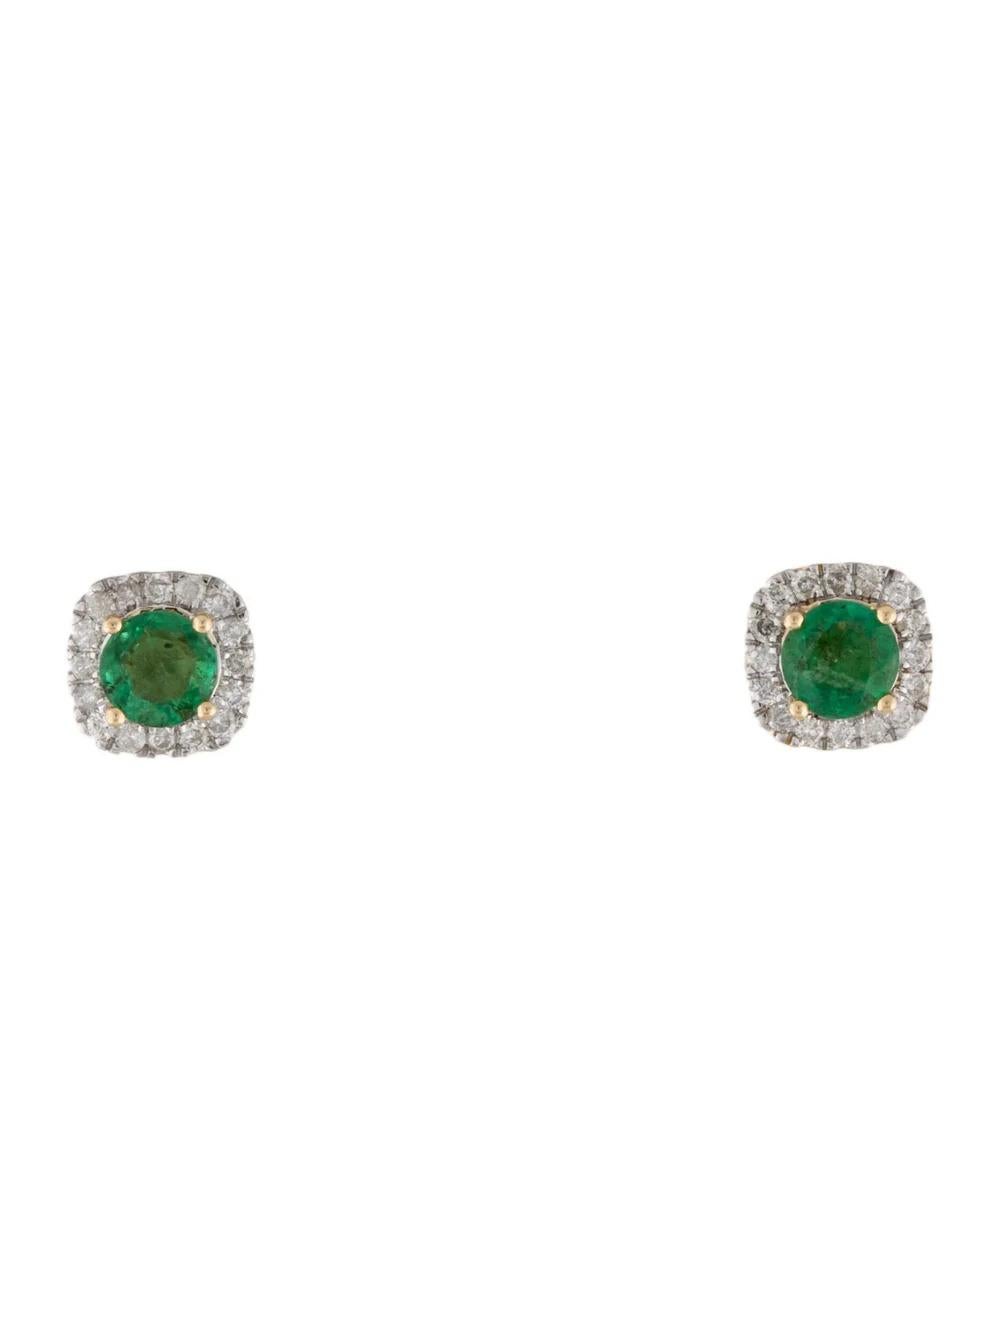 Enhance your elegance with these exquisite 14K Yellow Gold Emerald & Diamond Halo Stud Earrings. Crafted to perfection, these earrings feature a stunning 0.70 Carat Mixed Cut & Round Emerald surrounded by a halo of 32 sparkling Round Brilliant